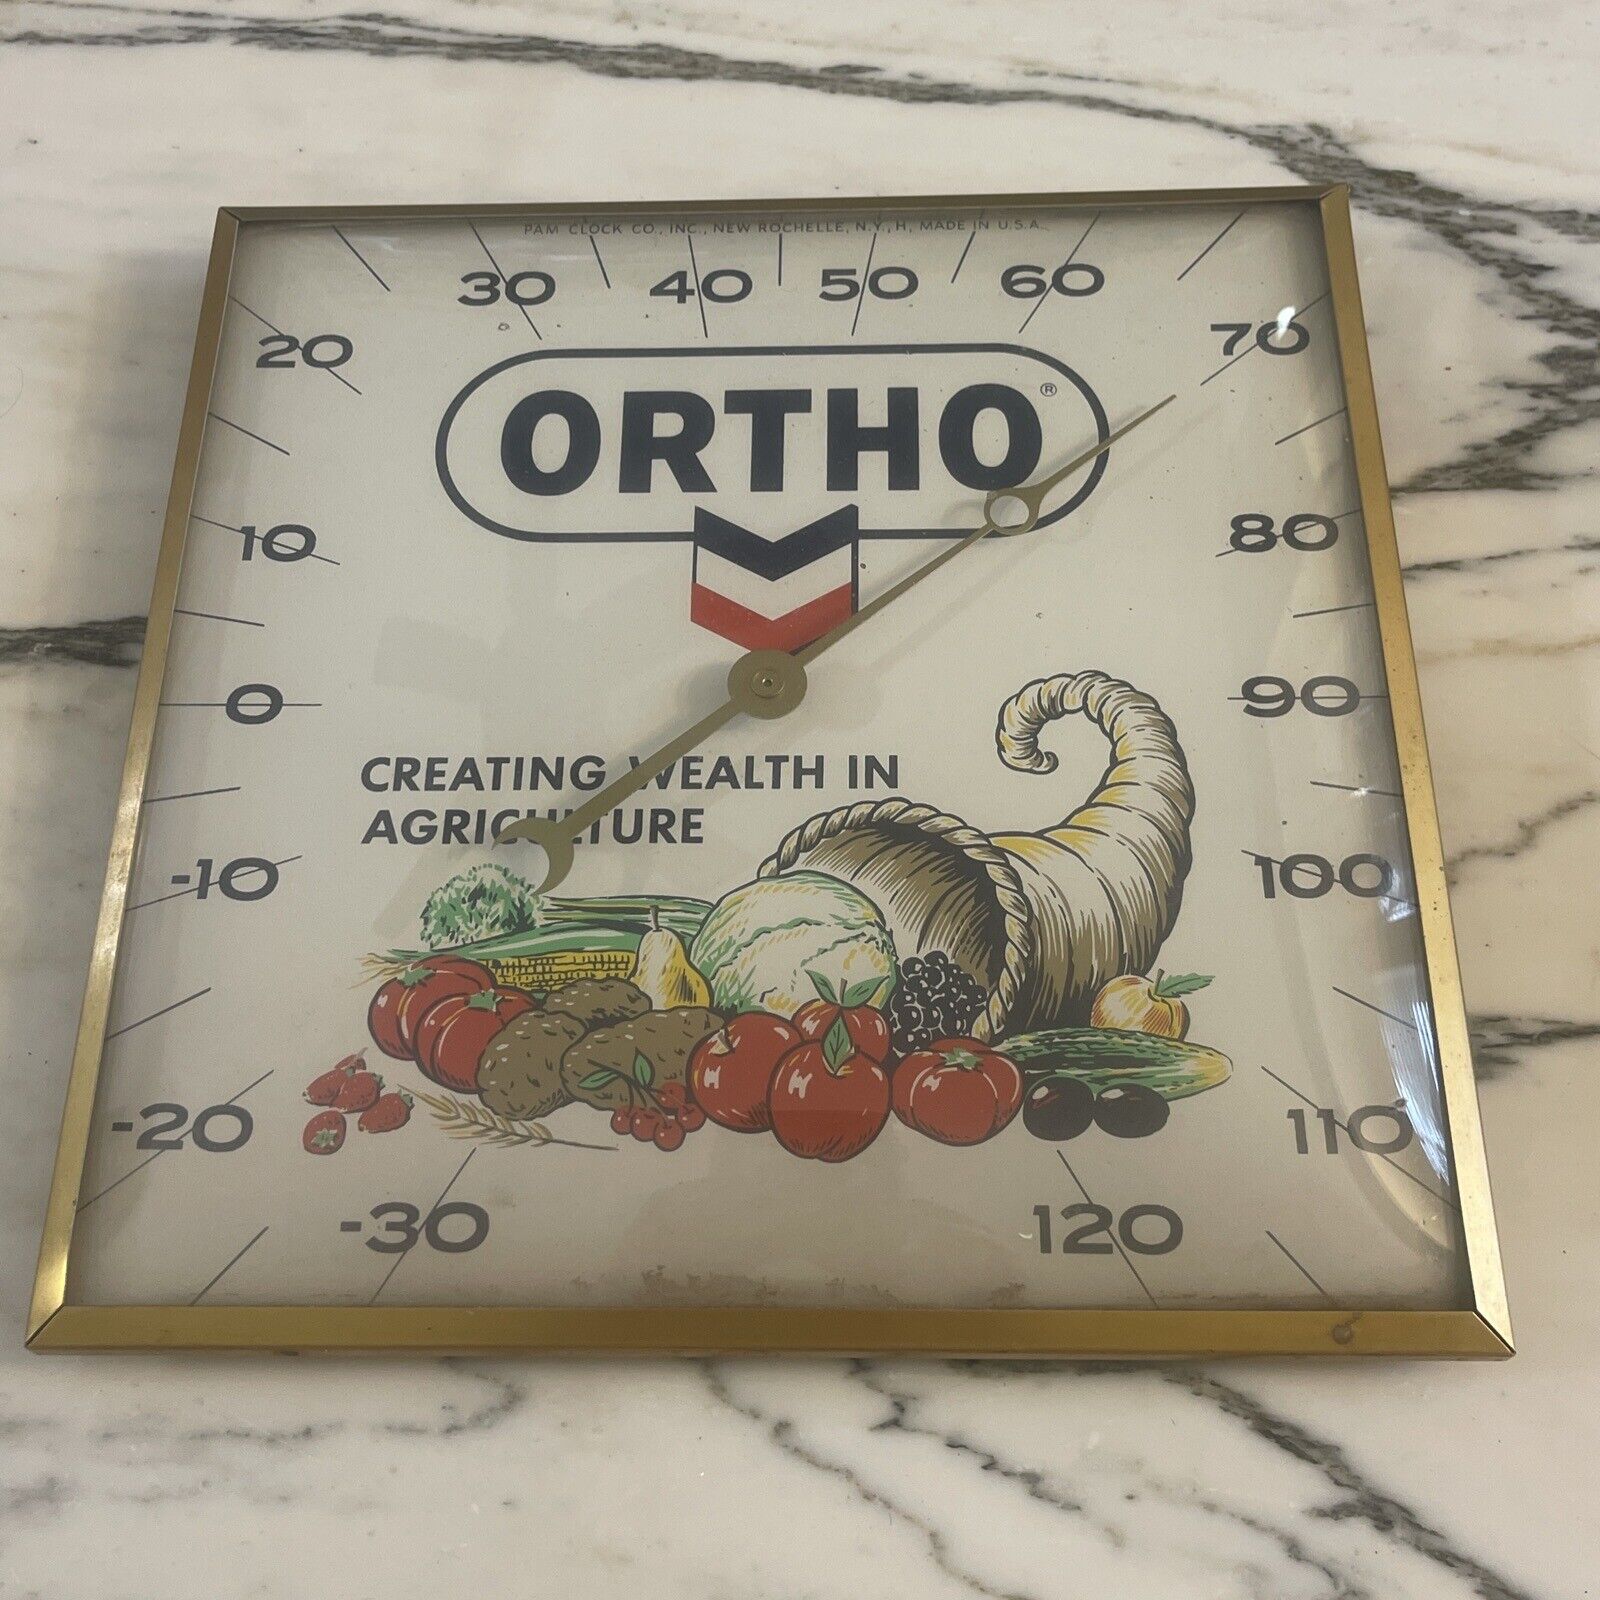 Vintage Thermometer Advertising Ortho Curved Glass 12”x12”